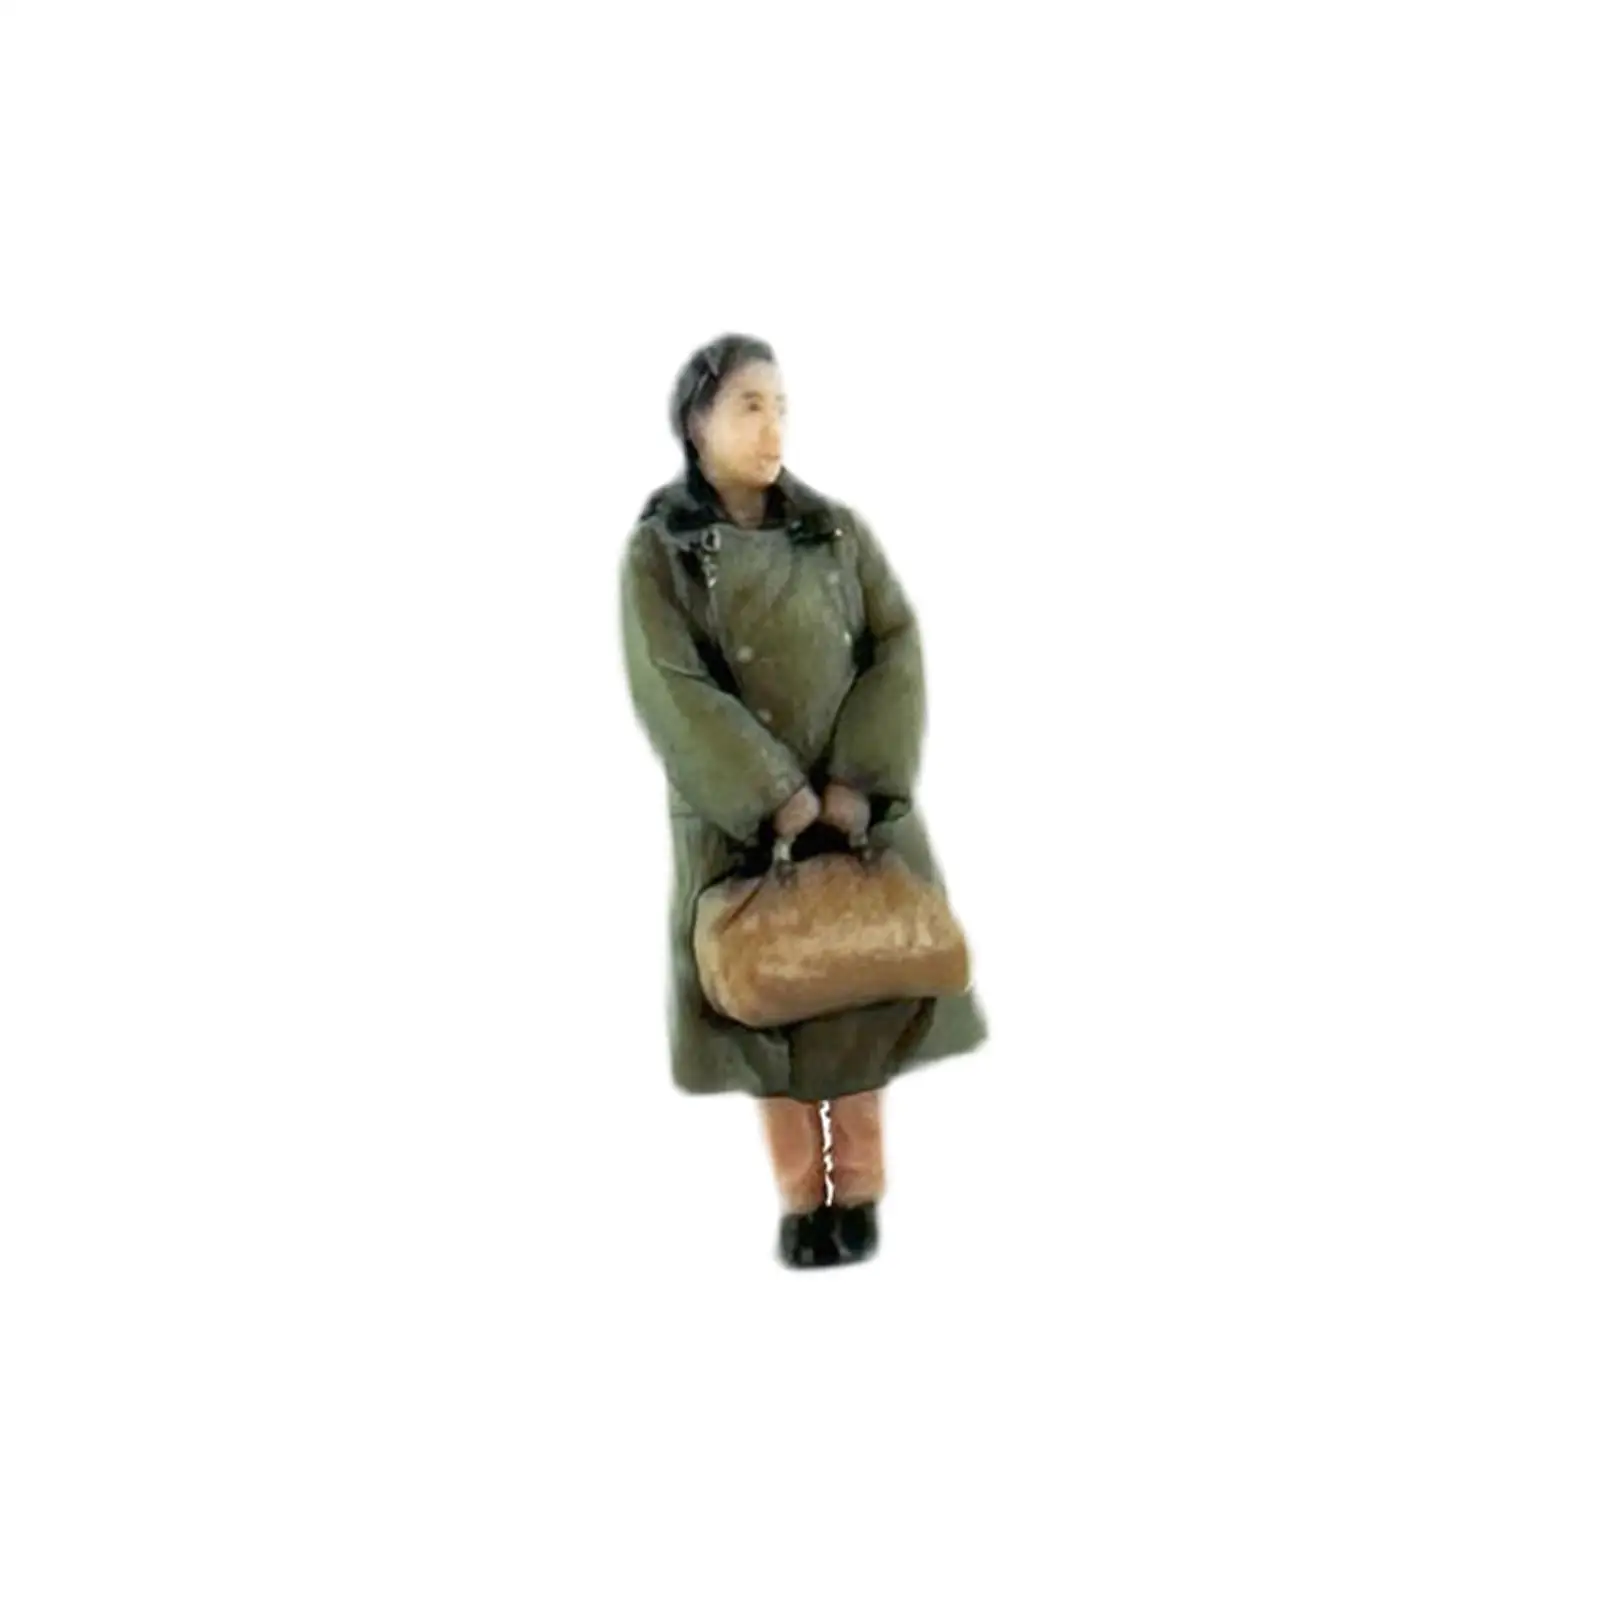 1:64 Wearing Green Coat Figures Desk Decoration Tiny People Model for Photography Props Scenery Landscape Dollhouse Layout Decor